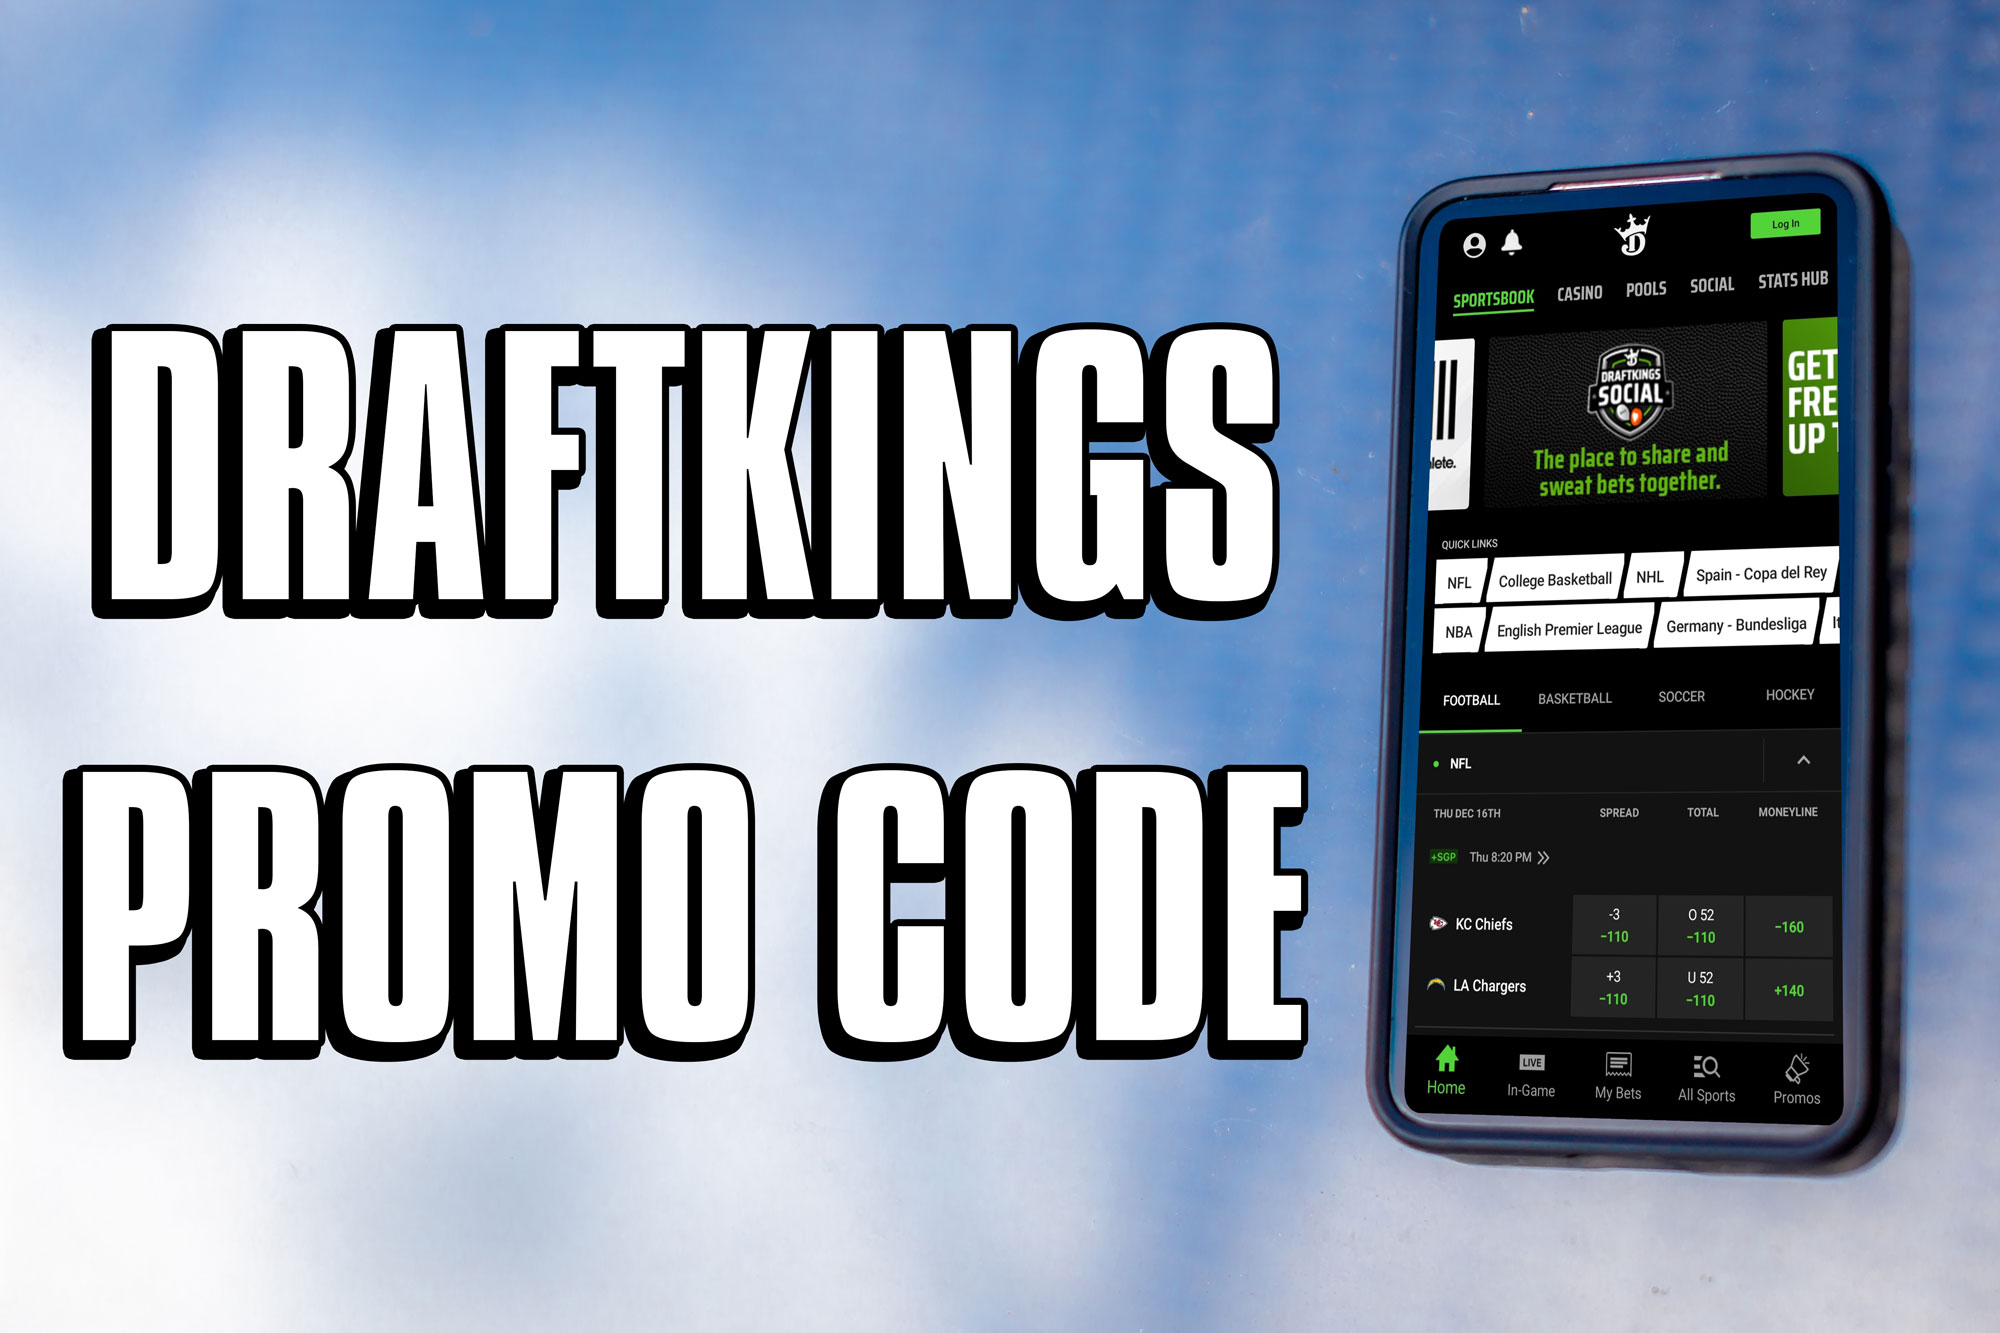 Bet $5, Get $200 With DraftKings Promo Code + No Sweat SGPs For